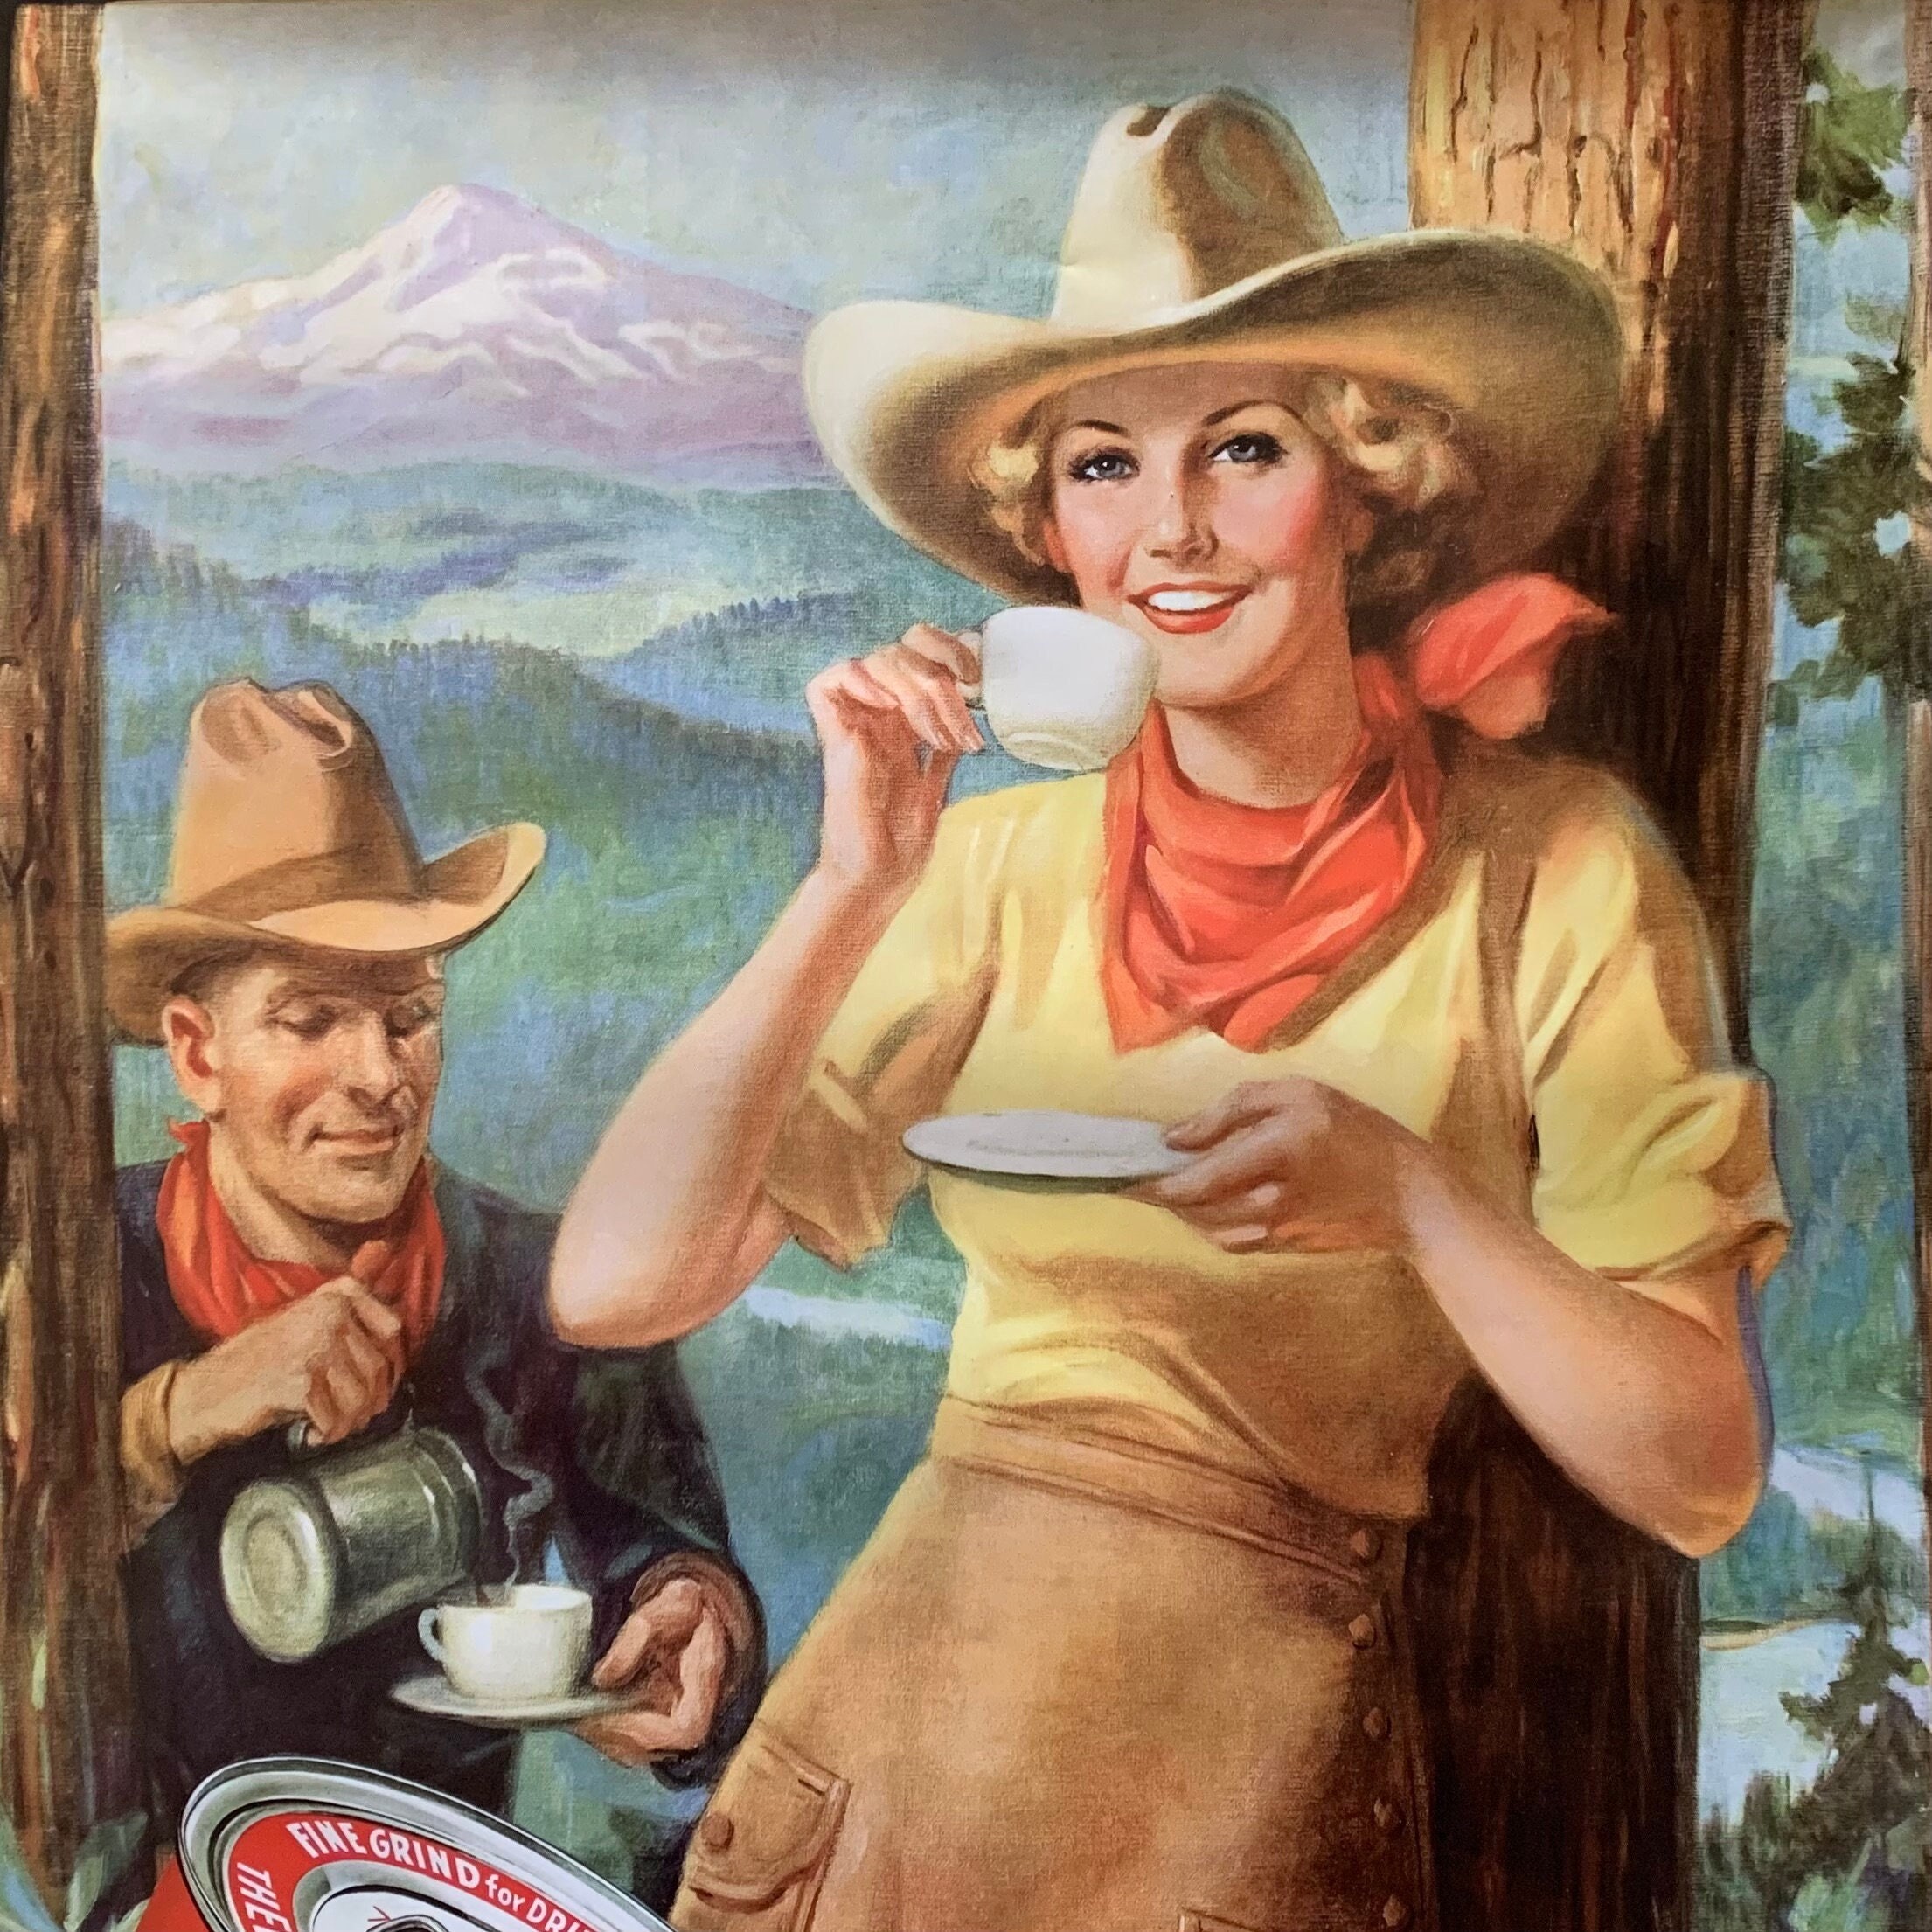 Large GOLDEN WEST COFFEE Cowgirl Advertising Poster Large Wall